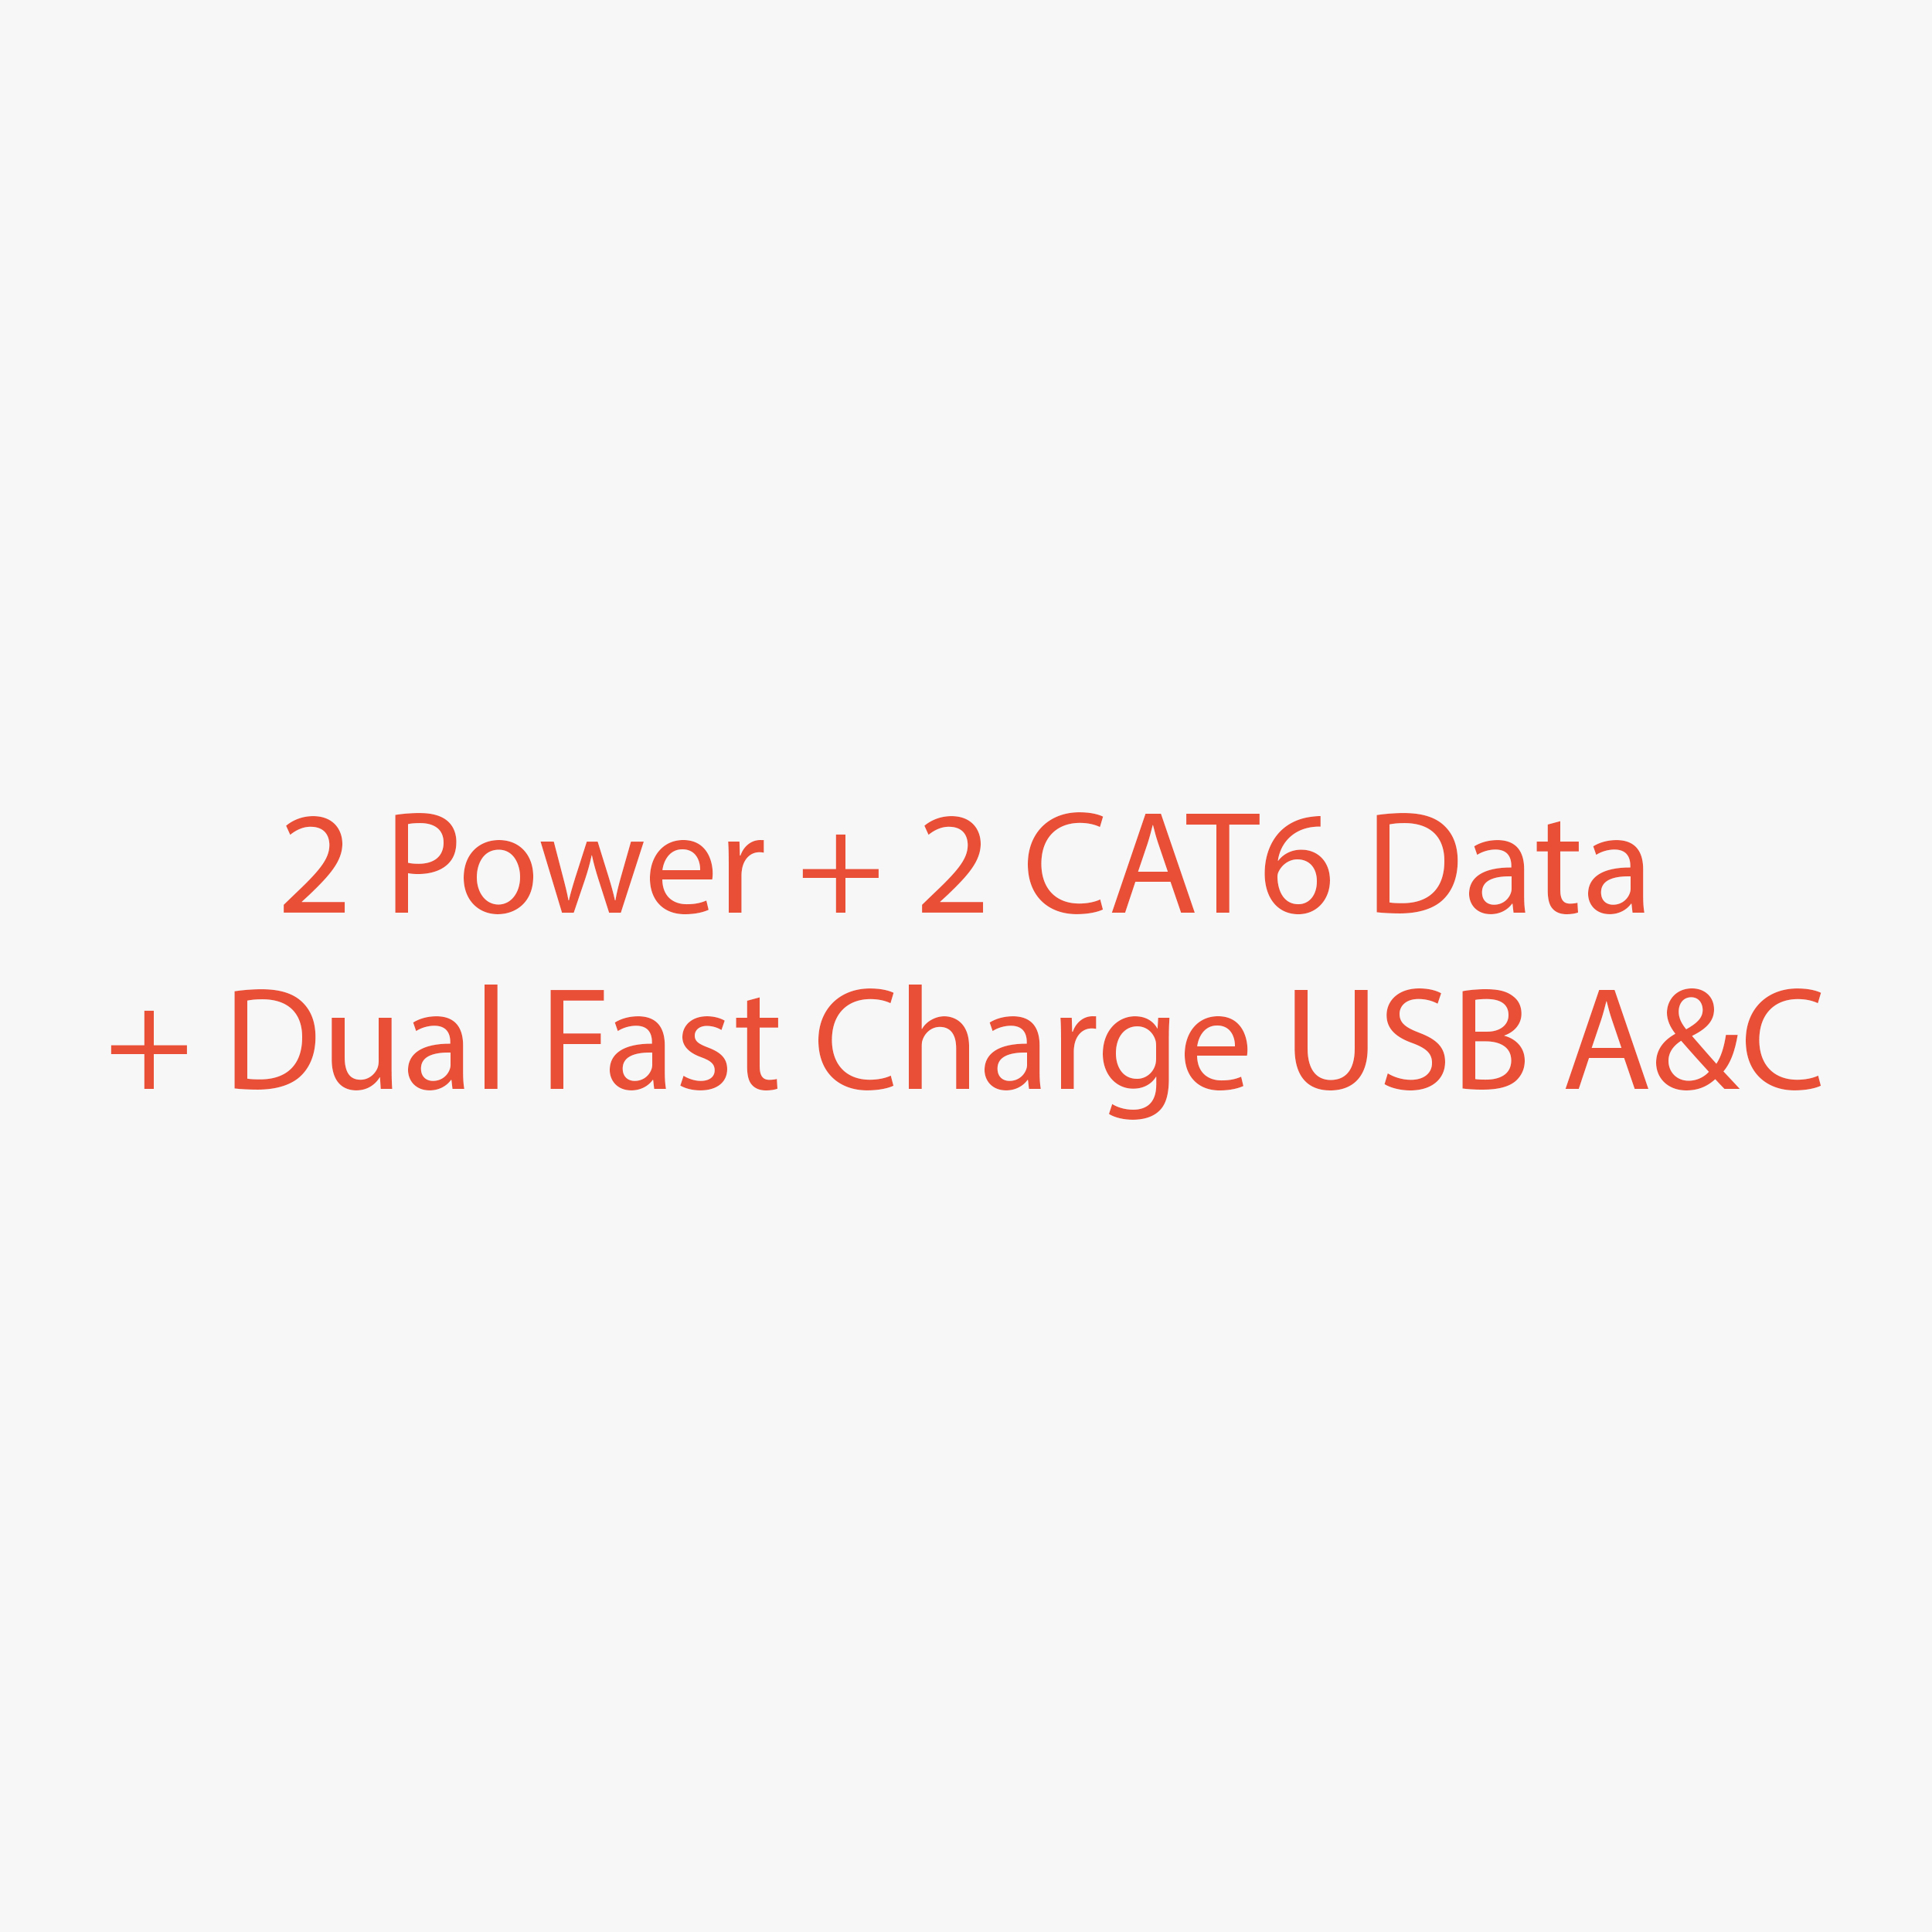 2 Power 2 CAT6 Data Dual Fast Charge USB AC